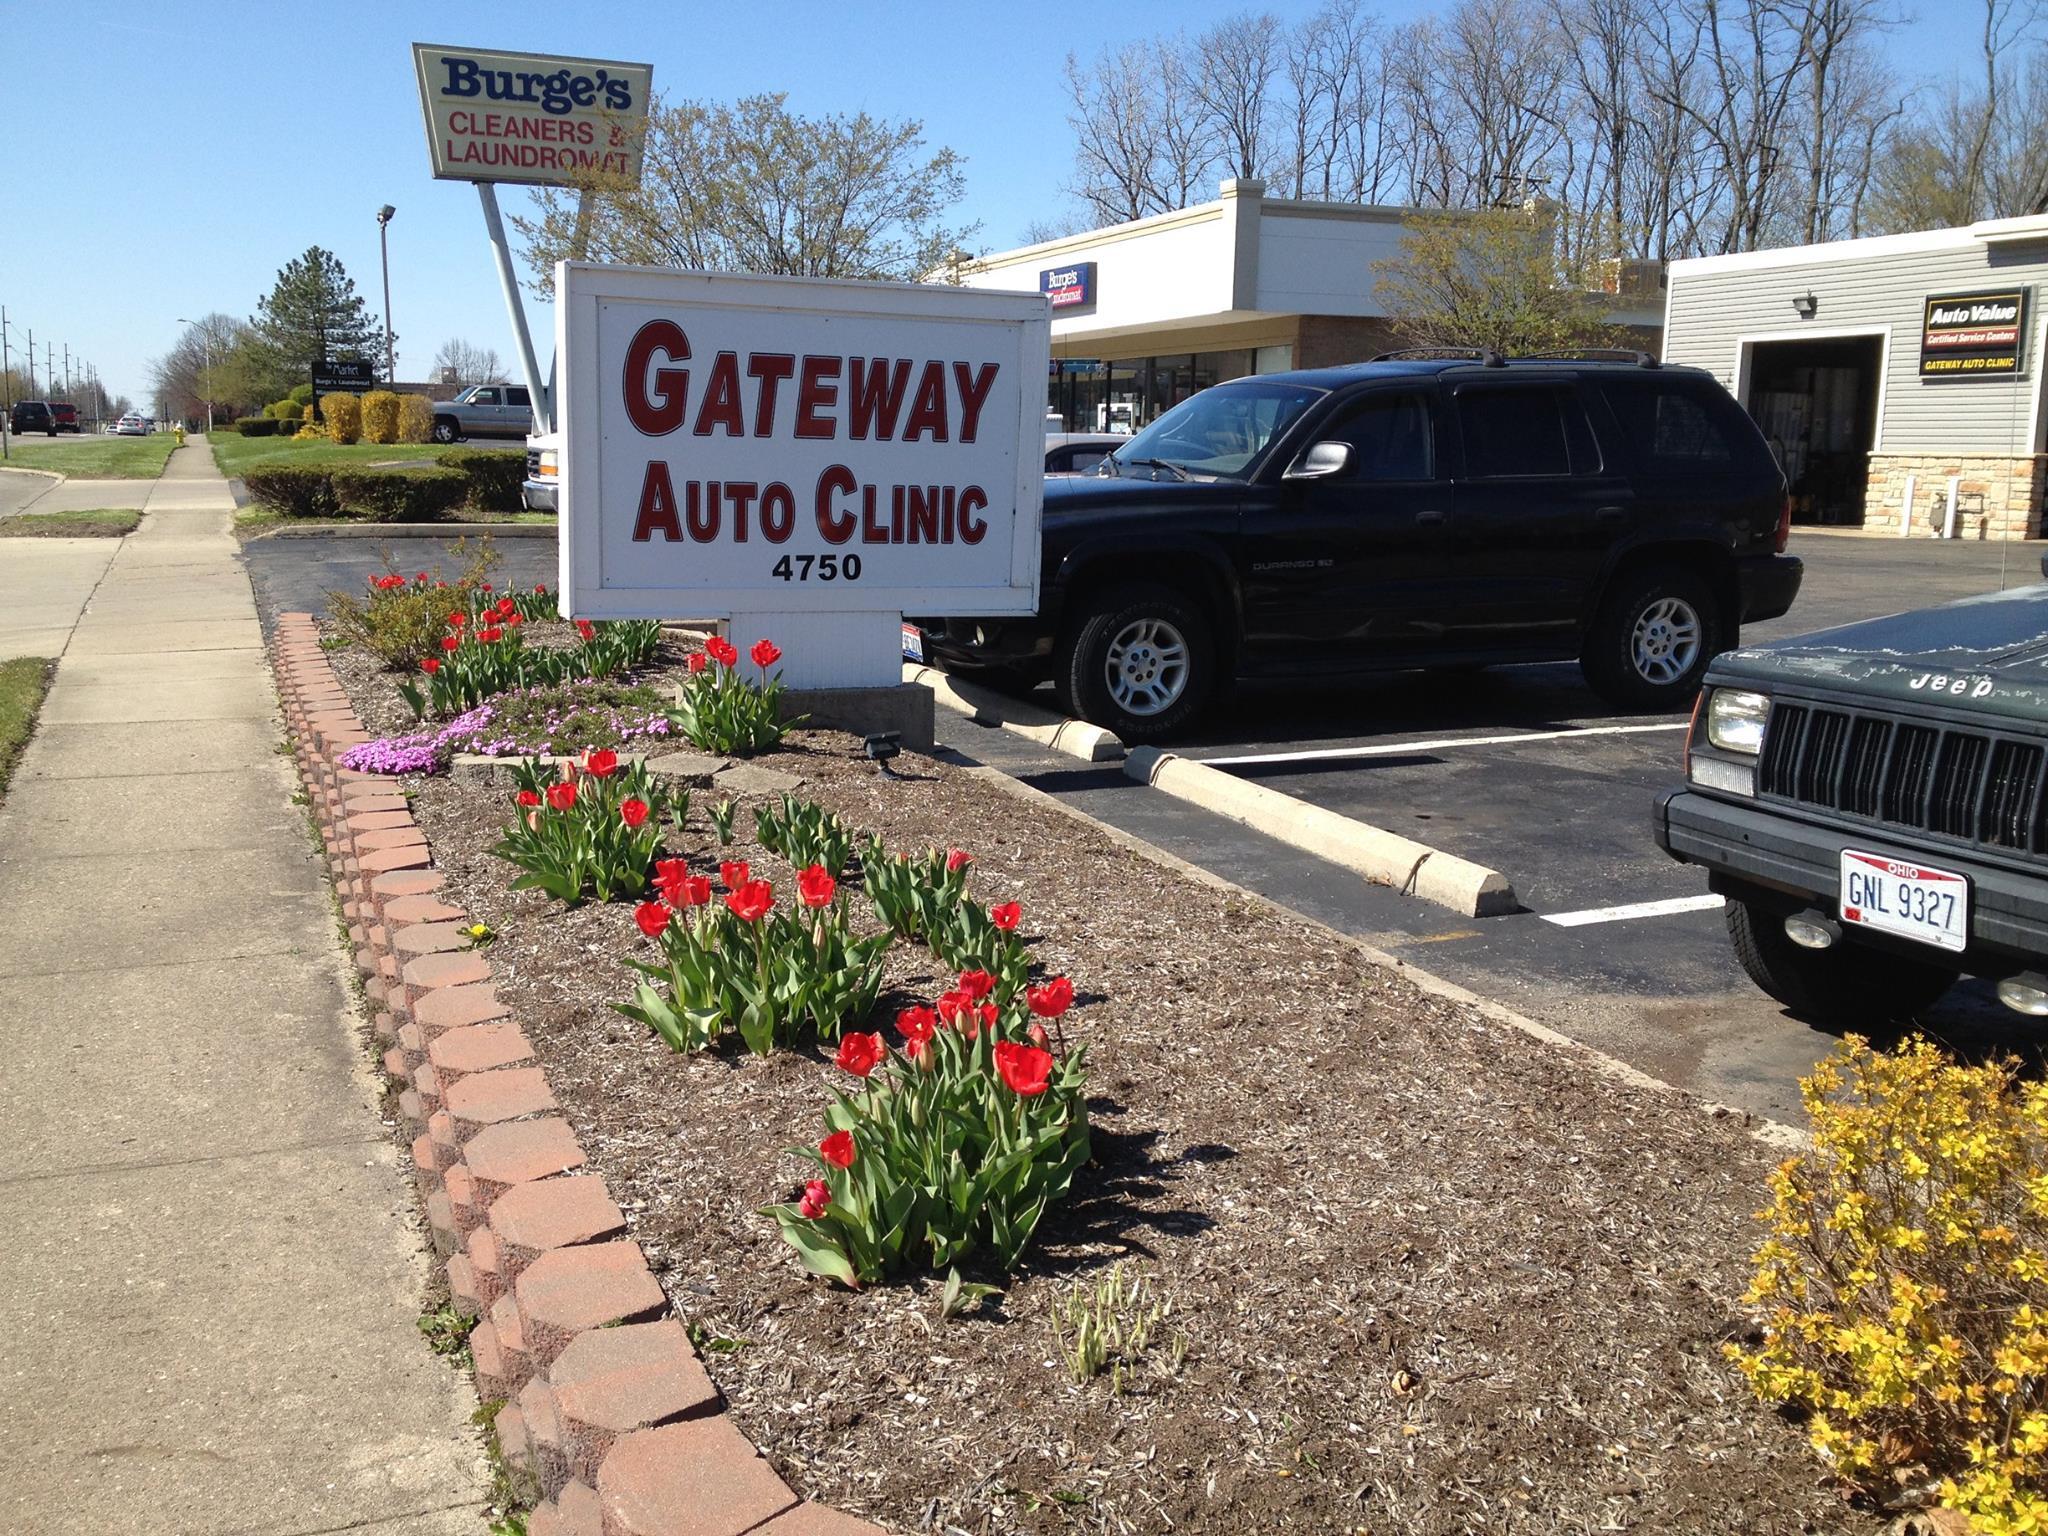 Gateway Auto Clinic believes in honest repairs and we demonstrate that by fully explaining the repair or service you are receiving.